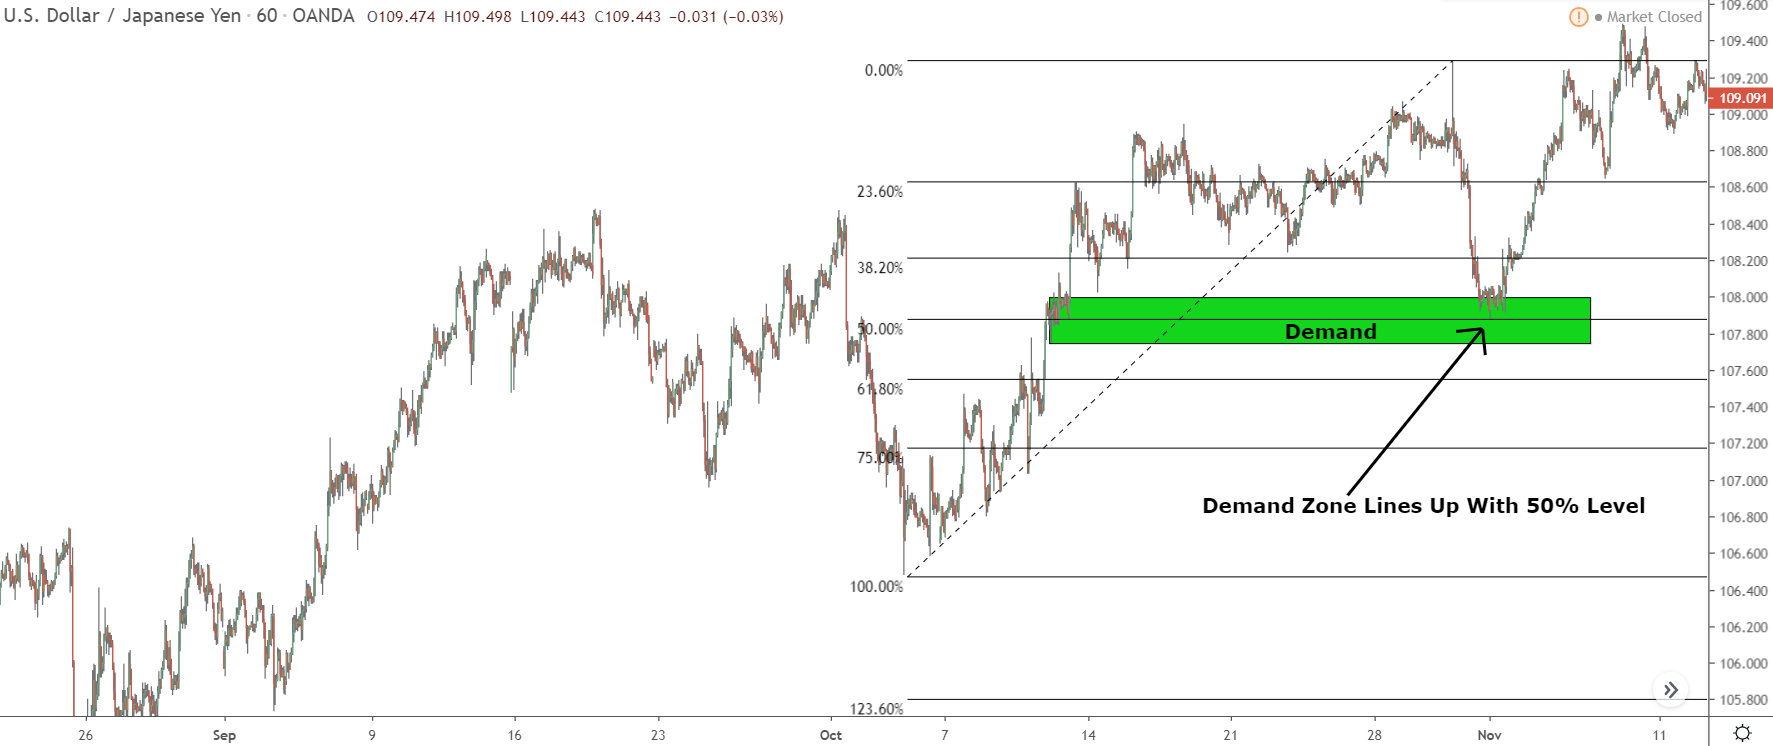 fib retracement has confluence with demand zone 